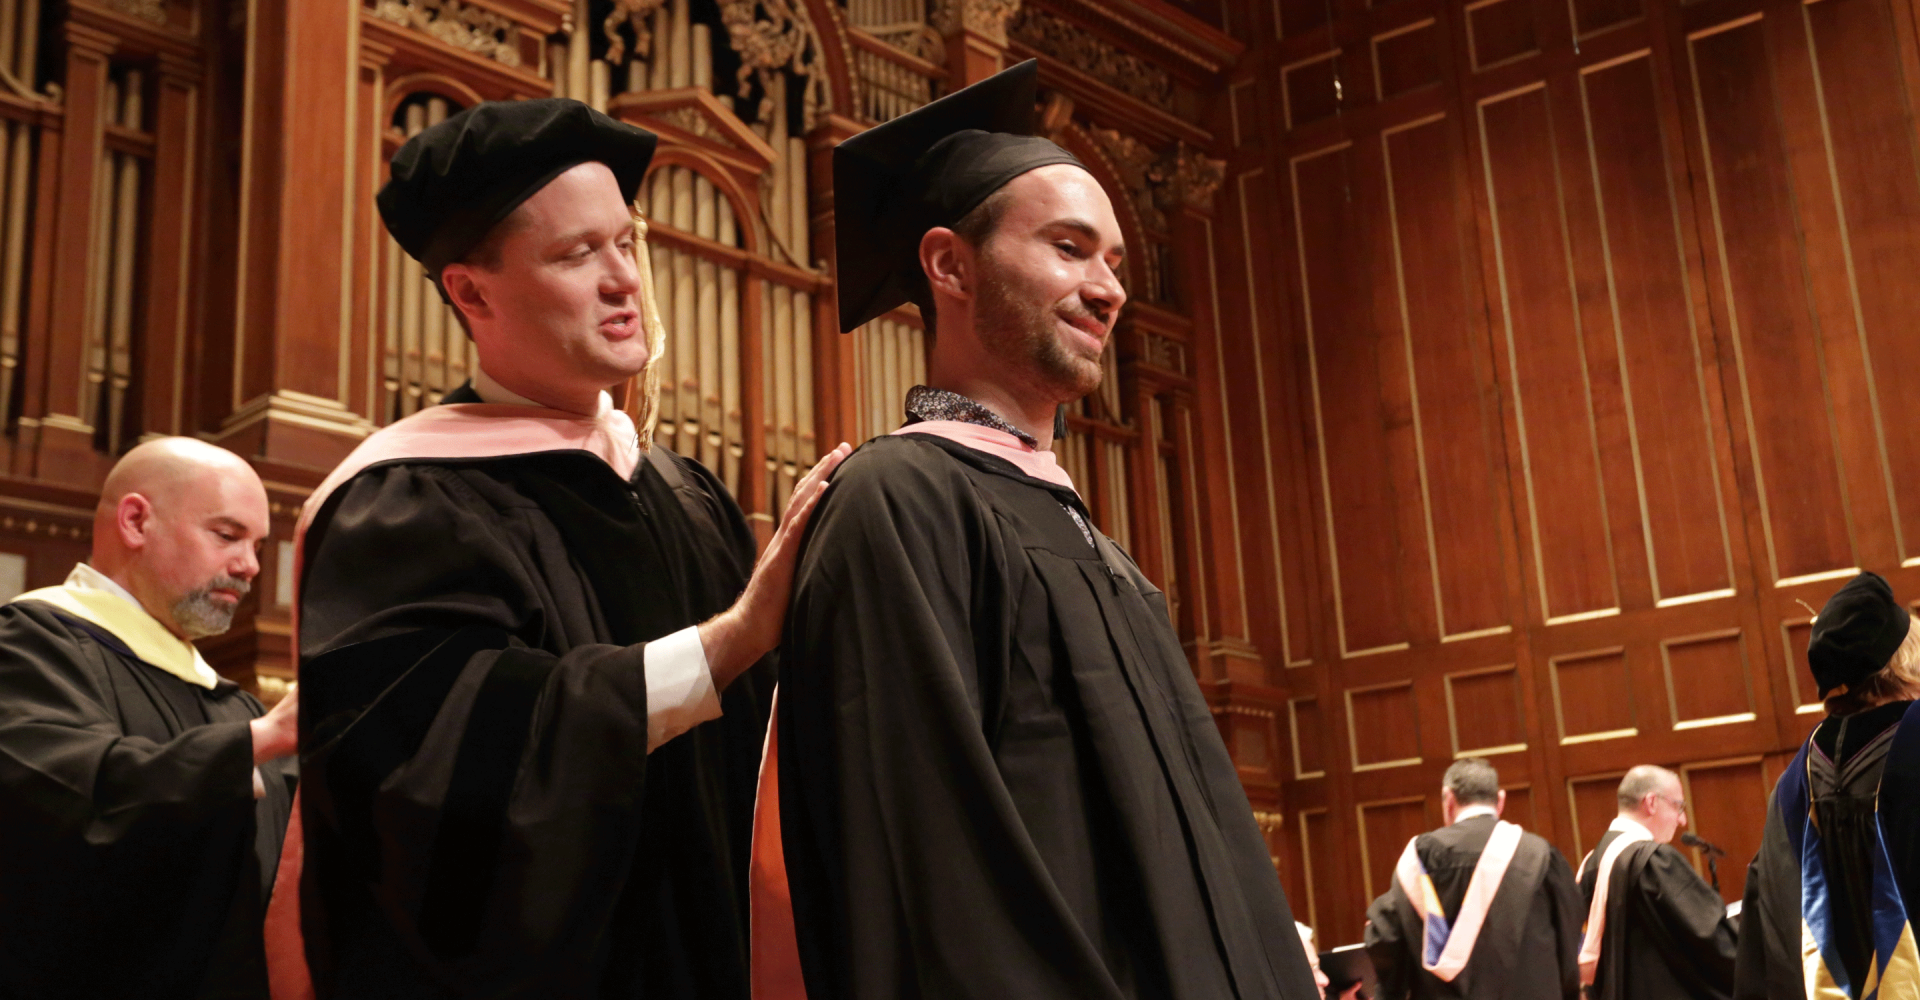 Alex Powell awards a master's hood to a graduate on the Jordan Hall stage